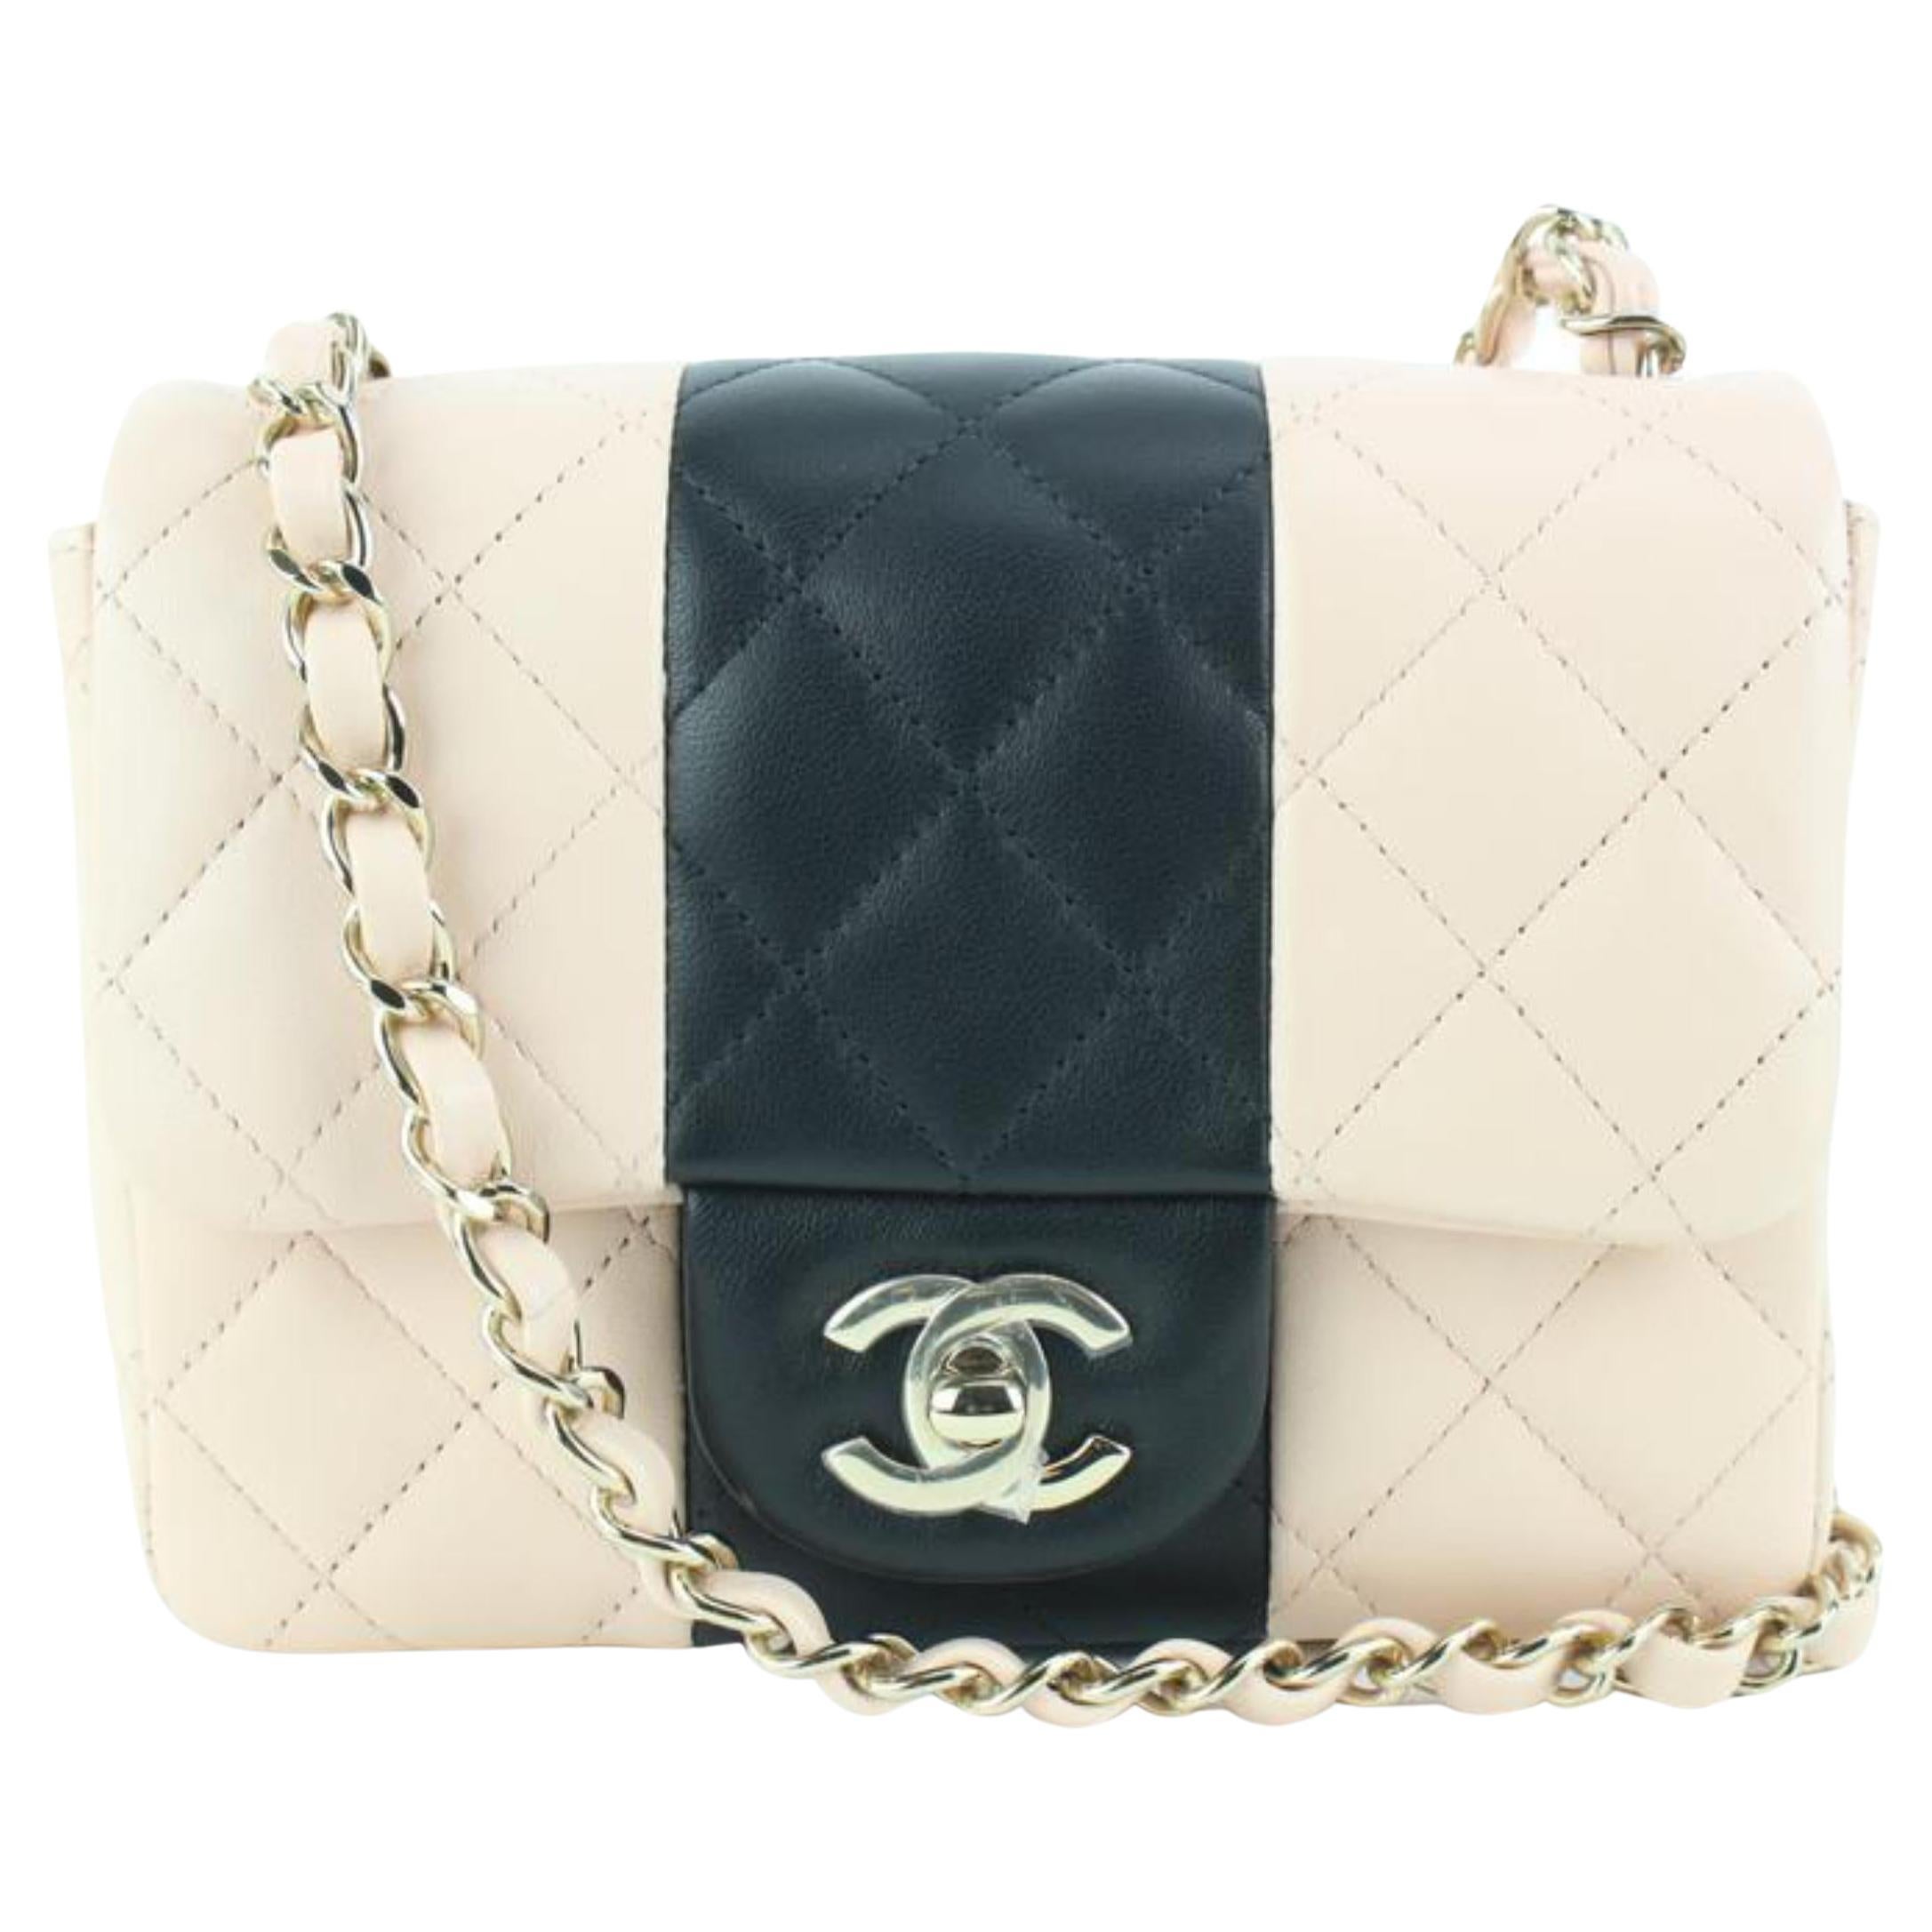 Chanel 22C Pink Medium Caviar Double Flap Bag Classic handbag purse leather  LGHW light gold hardware Womens Fashion Bags  Wallets Shoulder Bags on  Carousell